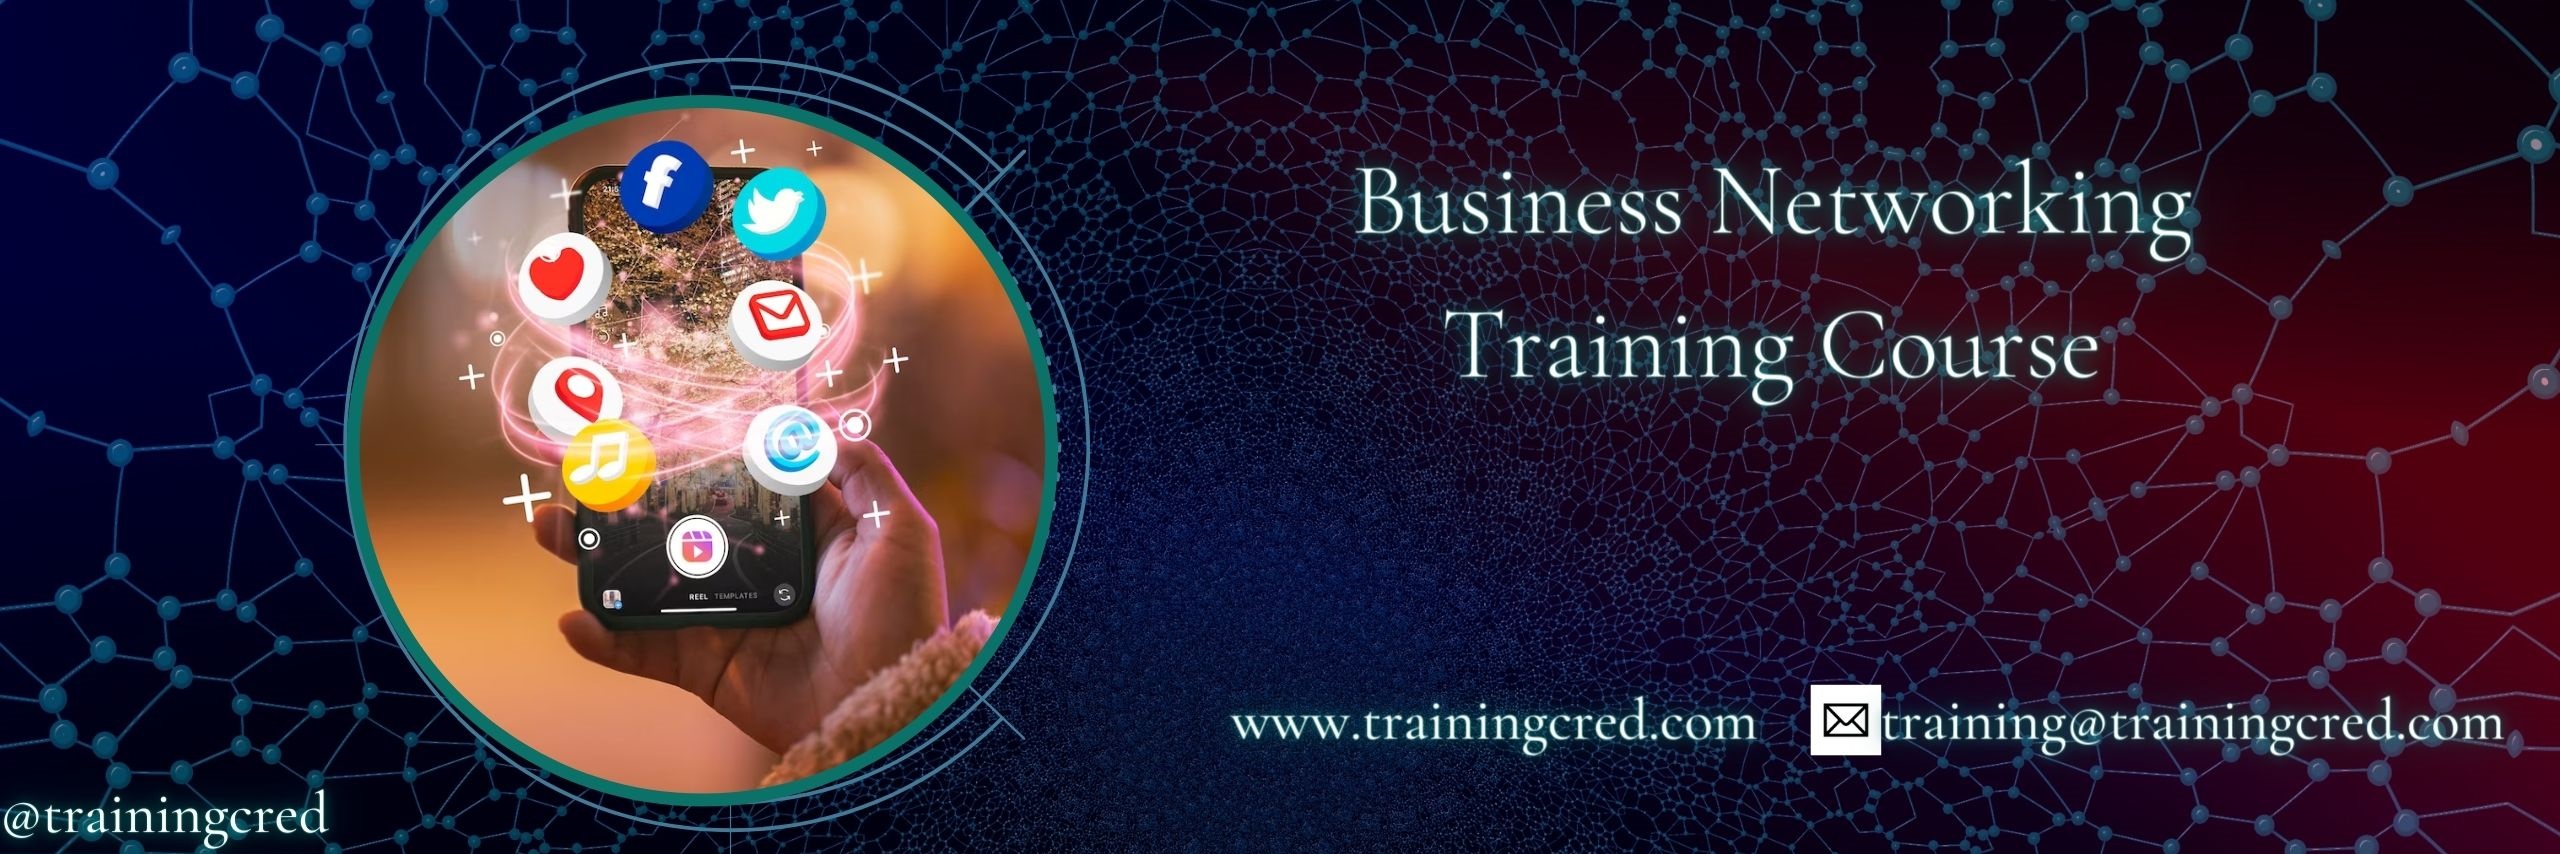 Business Networking Training